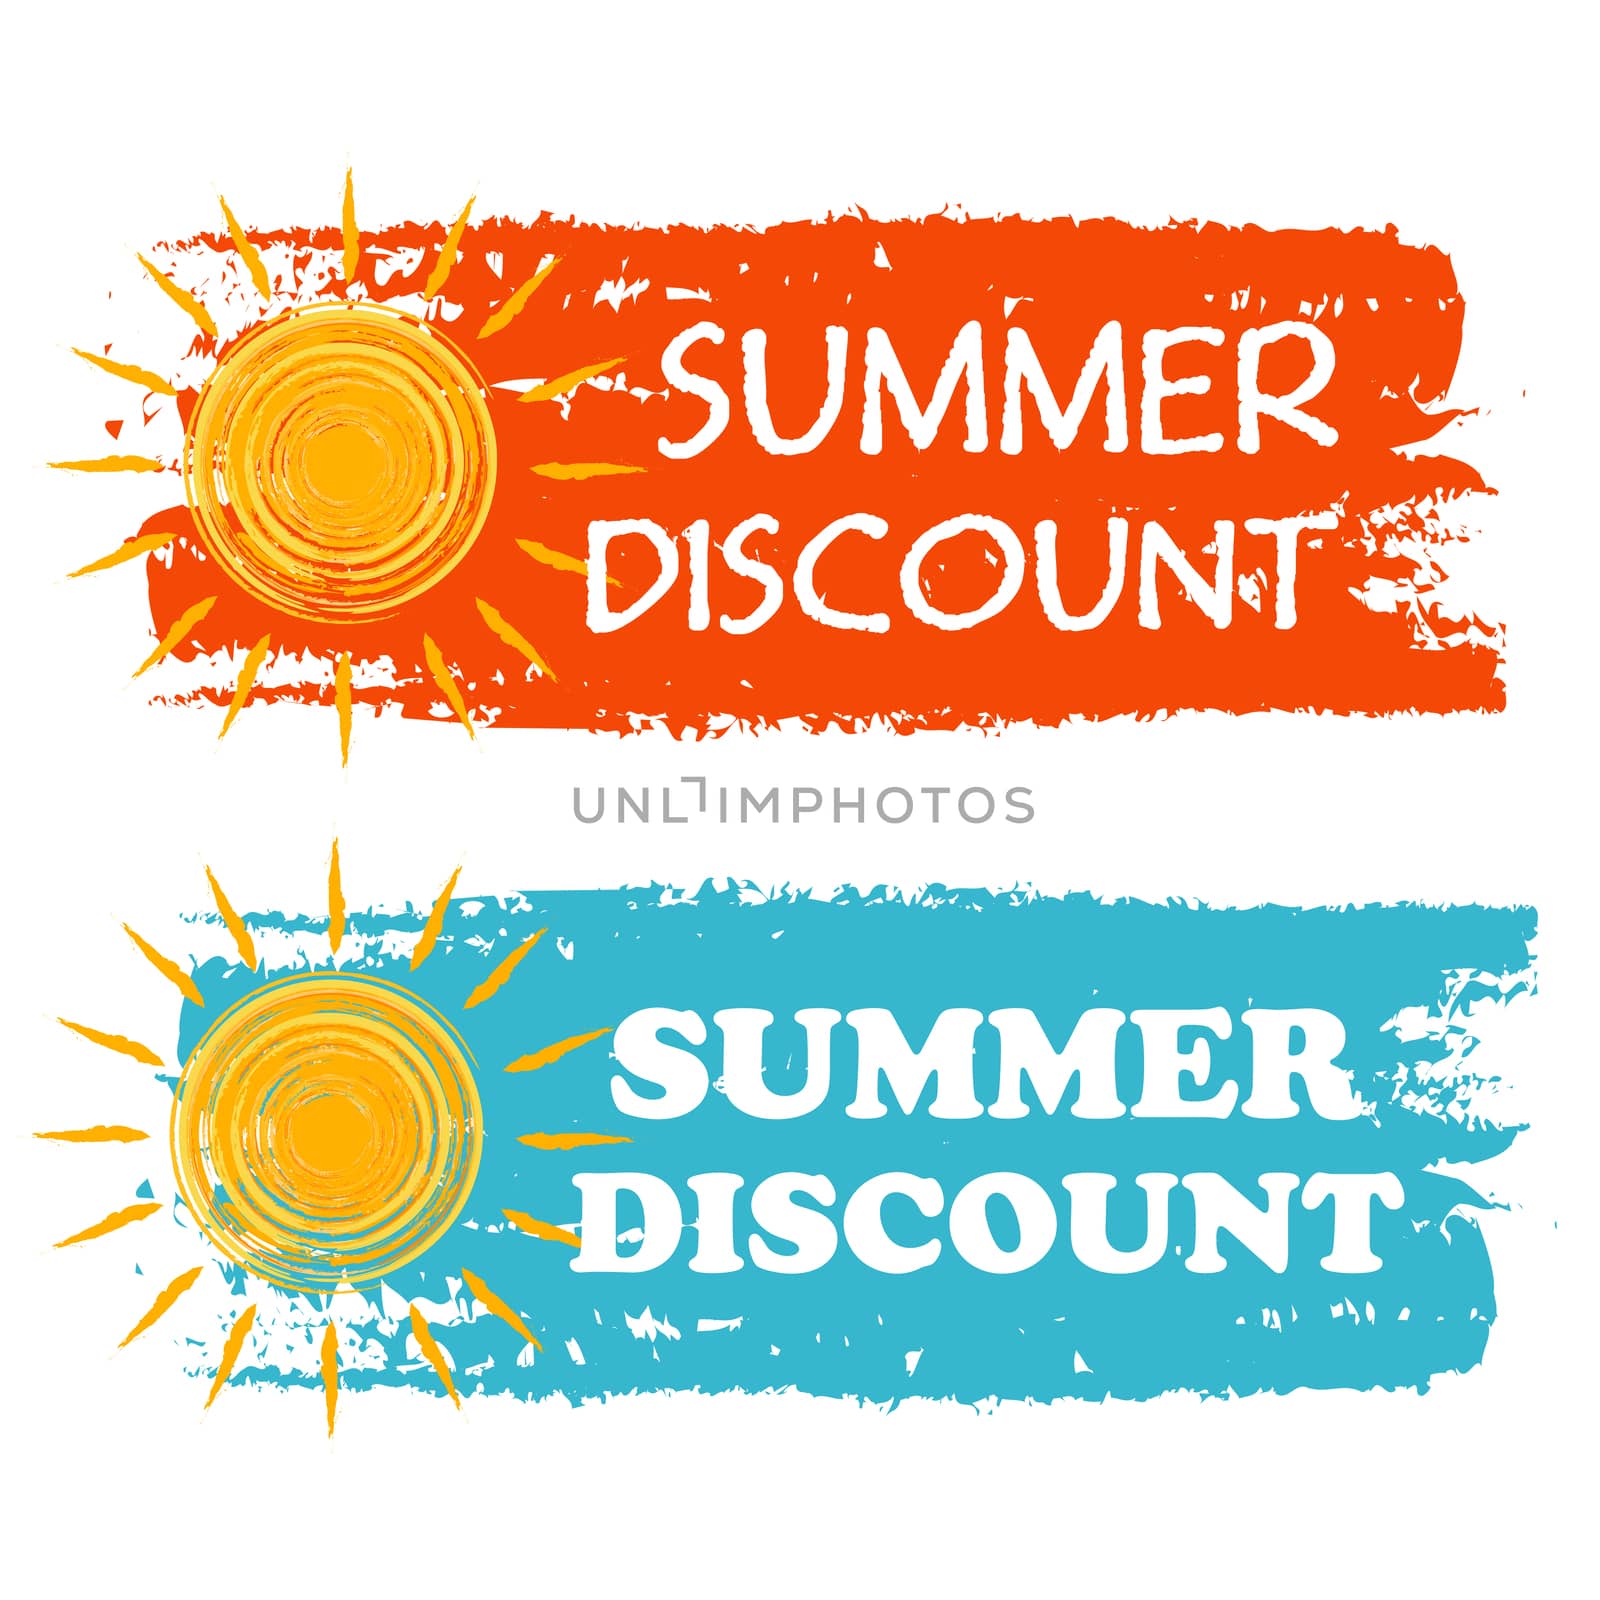 summer discount with yellow sun sign, orange and blue drawn labe by marinini